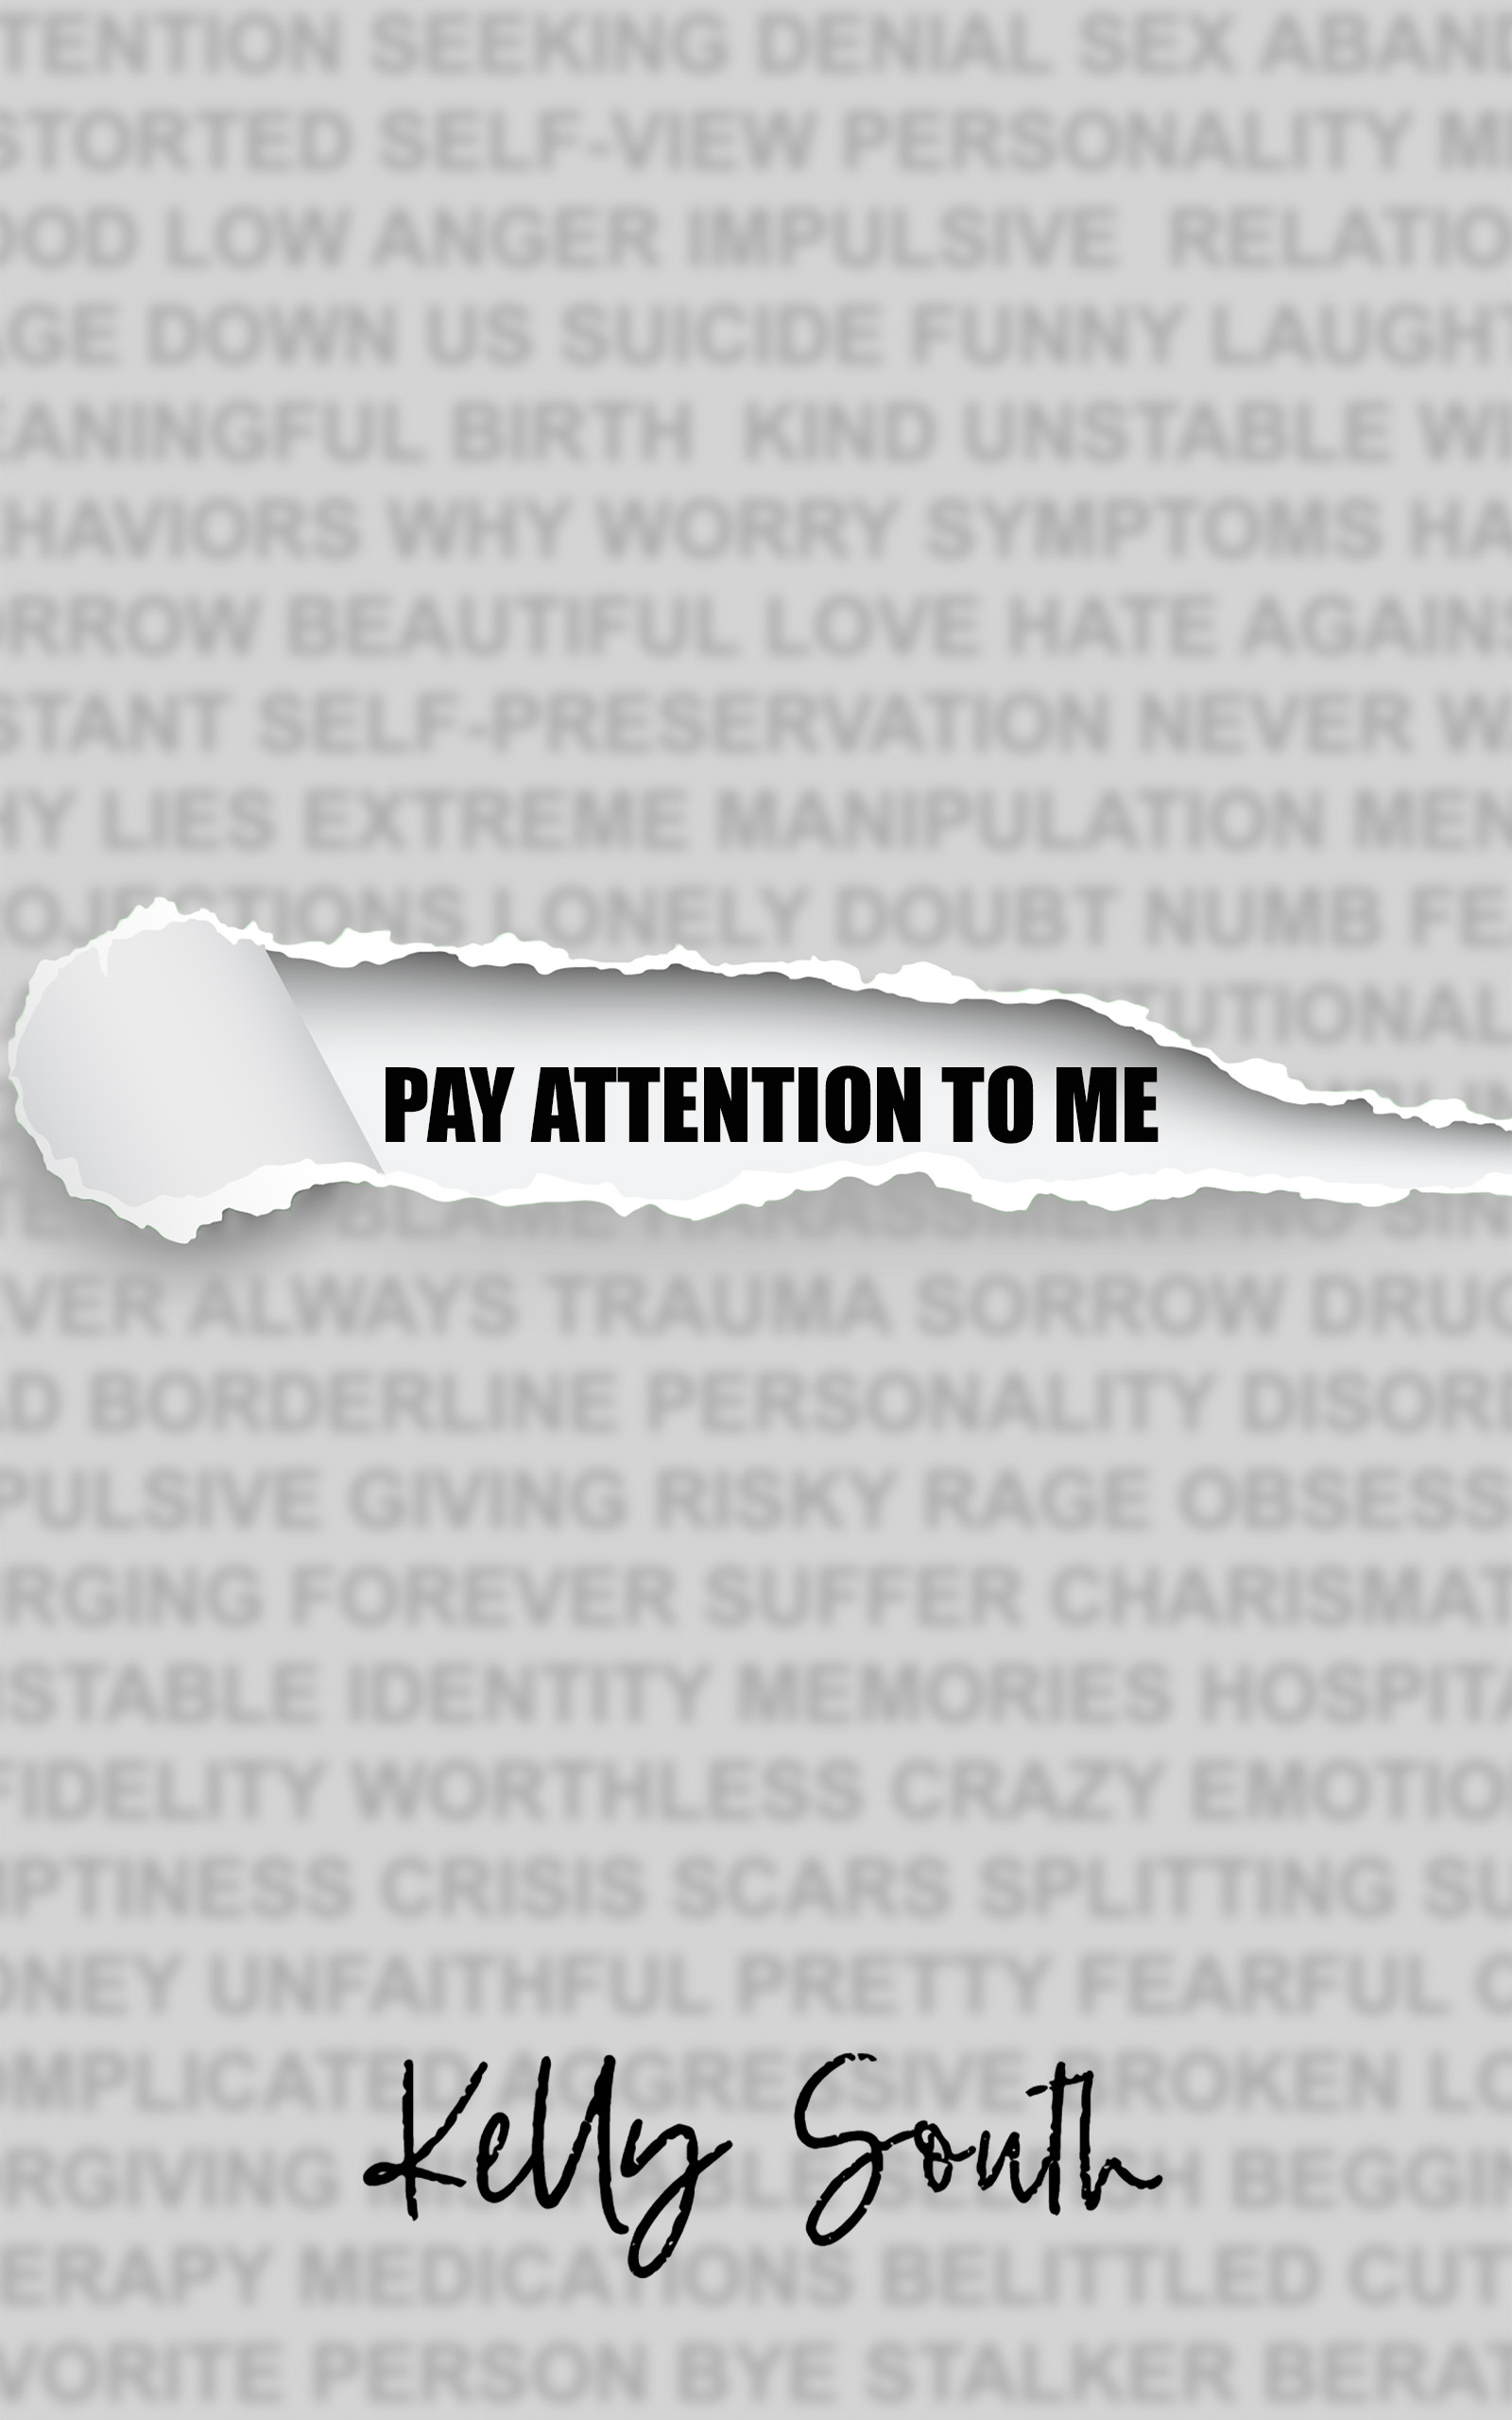 pay attention to me book cover, a memoir about BPD